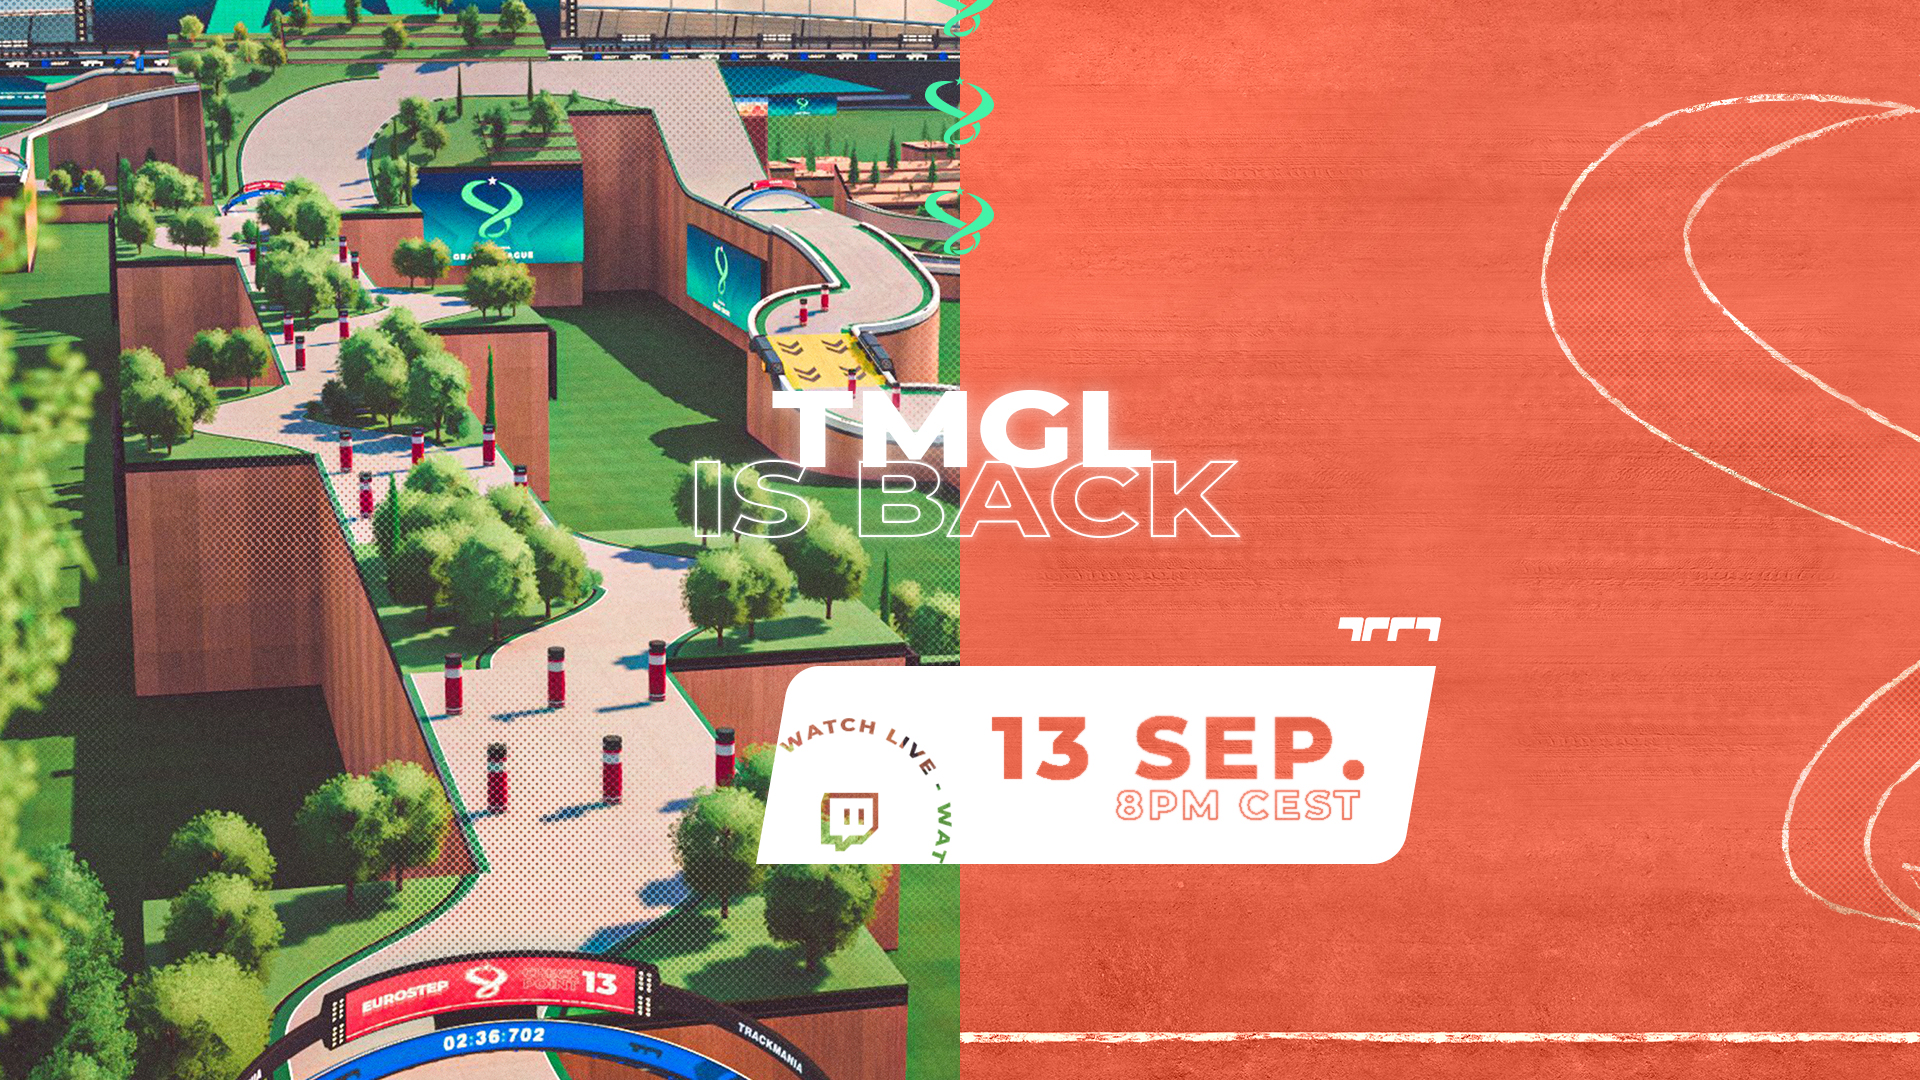 The Trackmania Grand League is back on September 13th!